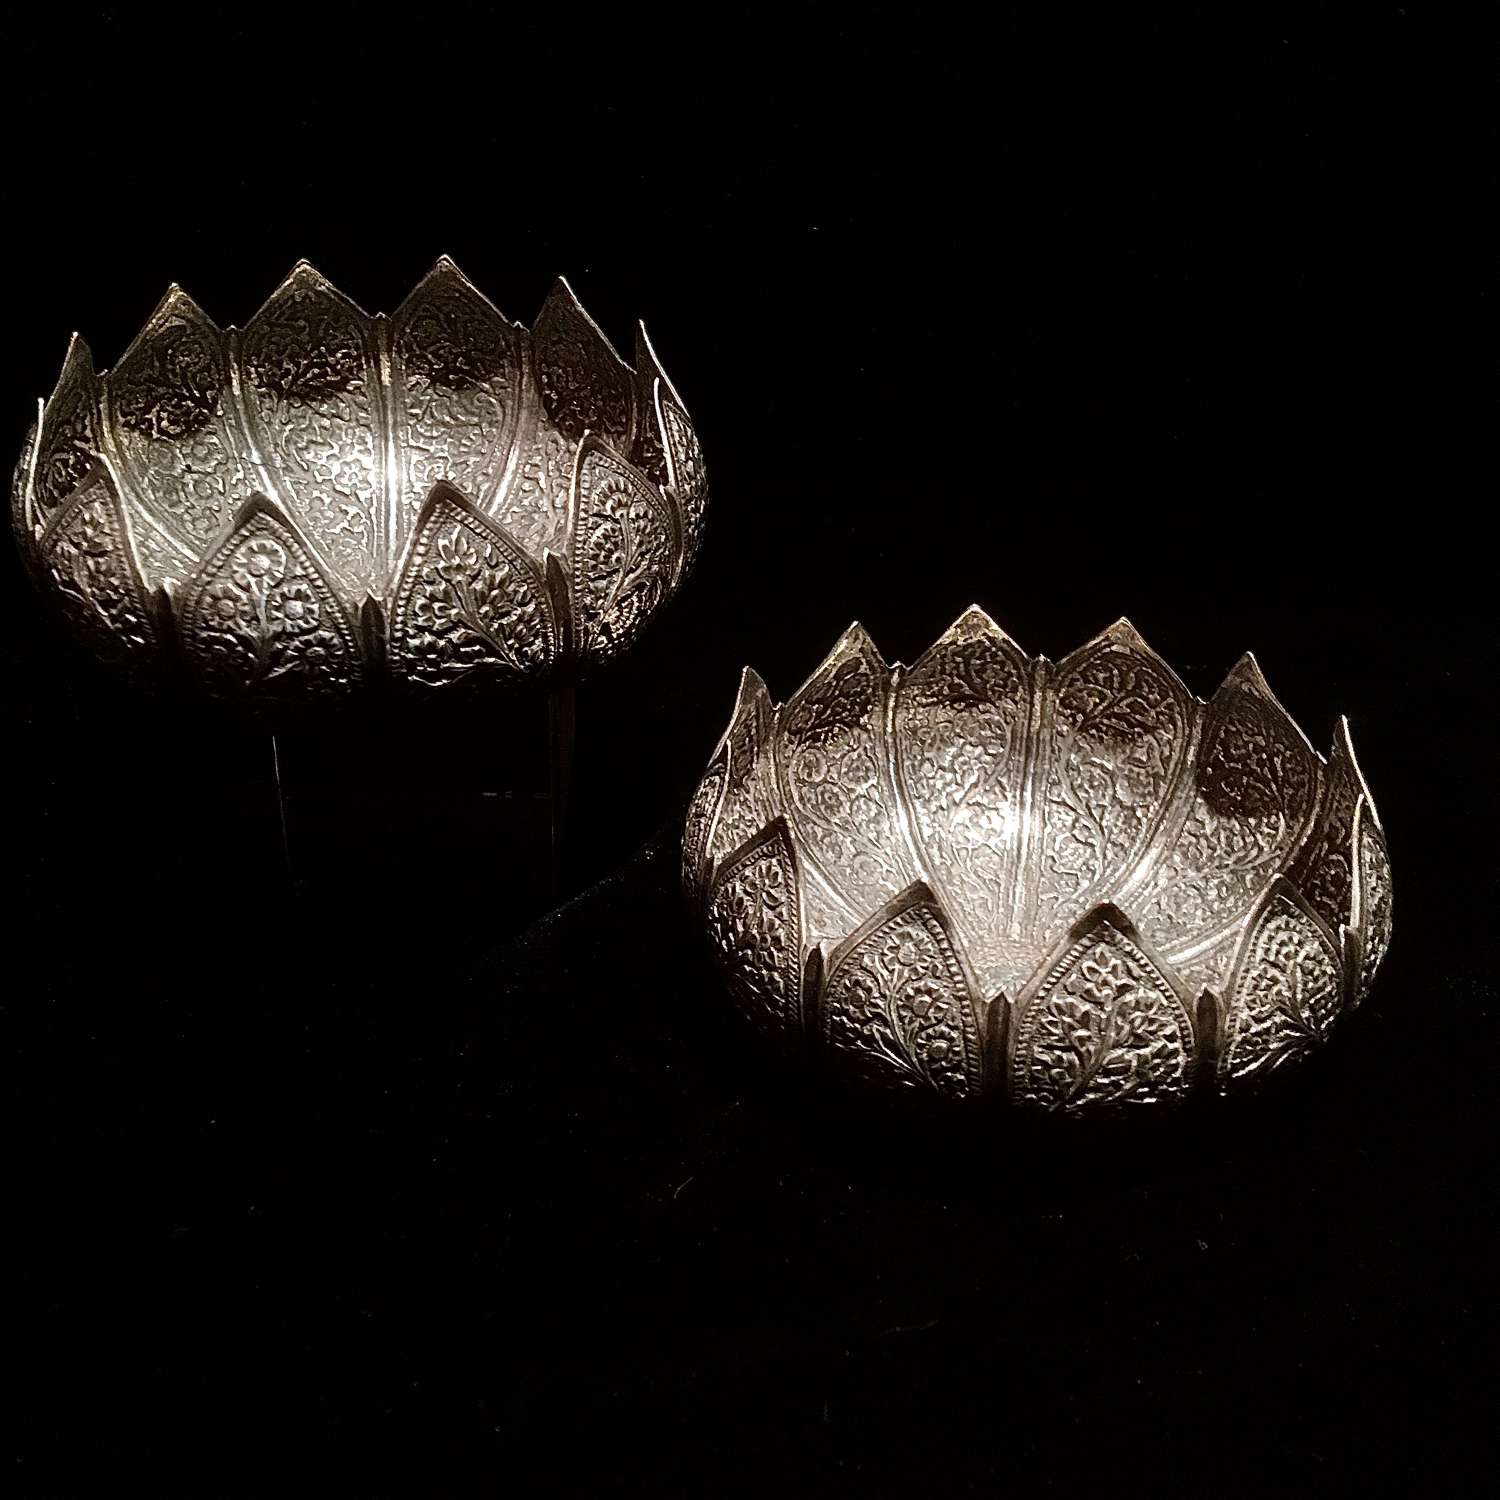 A beautiful pair of répoussé silver bowls in the form of lotus flowers